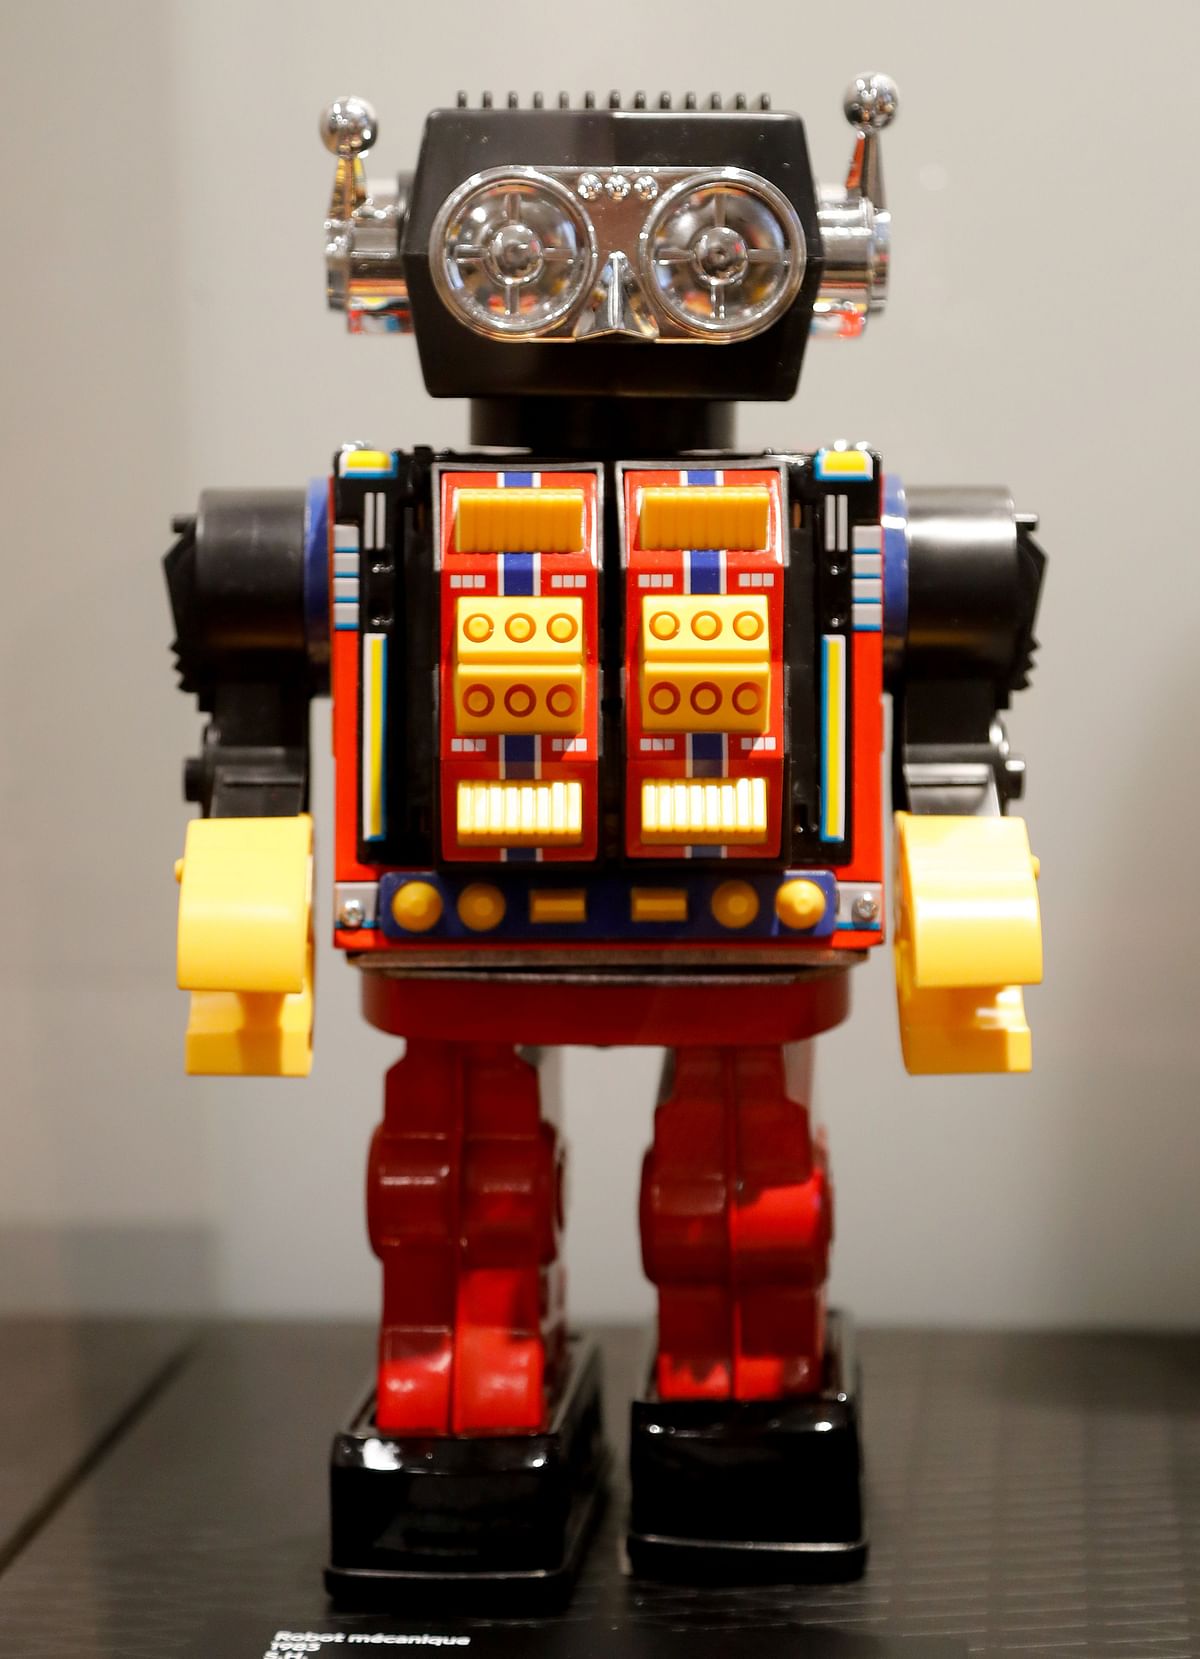 This picture taken on 17 October 2018 shows a Japanese mechanical robot (1983) during the exhibition ` La folle histoire du design` (The crazy story of design) at the Museum of Decorative Arts (Musee des Arts Decoratifs) in Paris. -- Photo: AFP